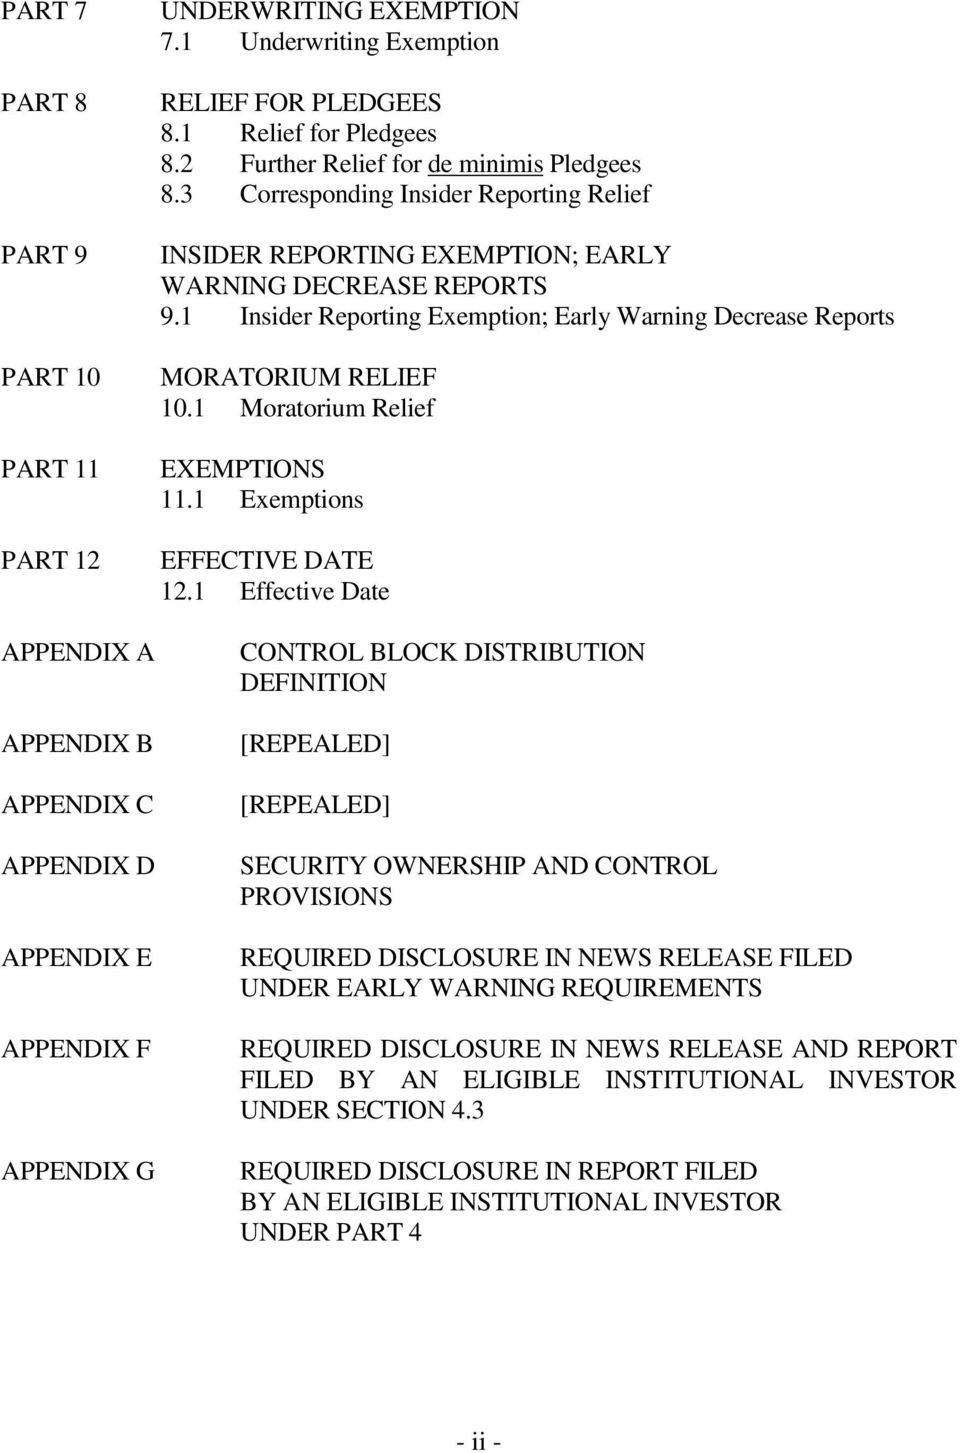 1 Insider Reporting Exemption; Early Warning Decrease Reports MORATORIUM RELIEF 10.1 Moratorium Relief EXEMPTIONS 11.1 Exemptions EFFECTIVE DATE 12.